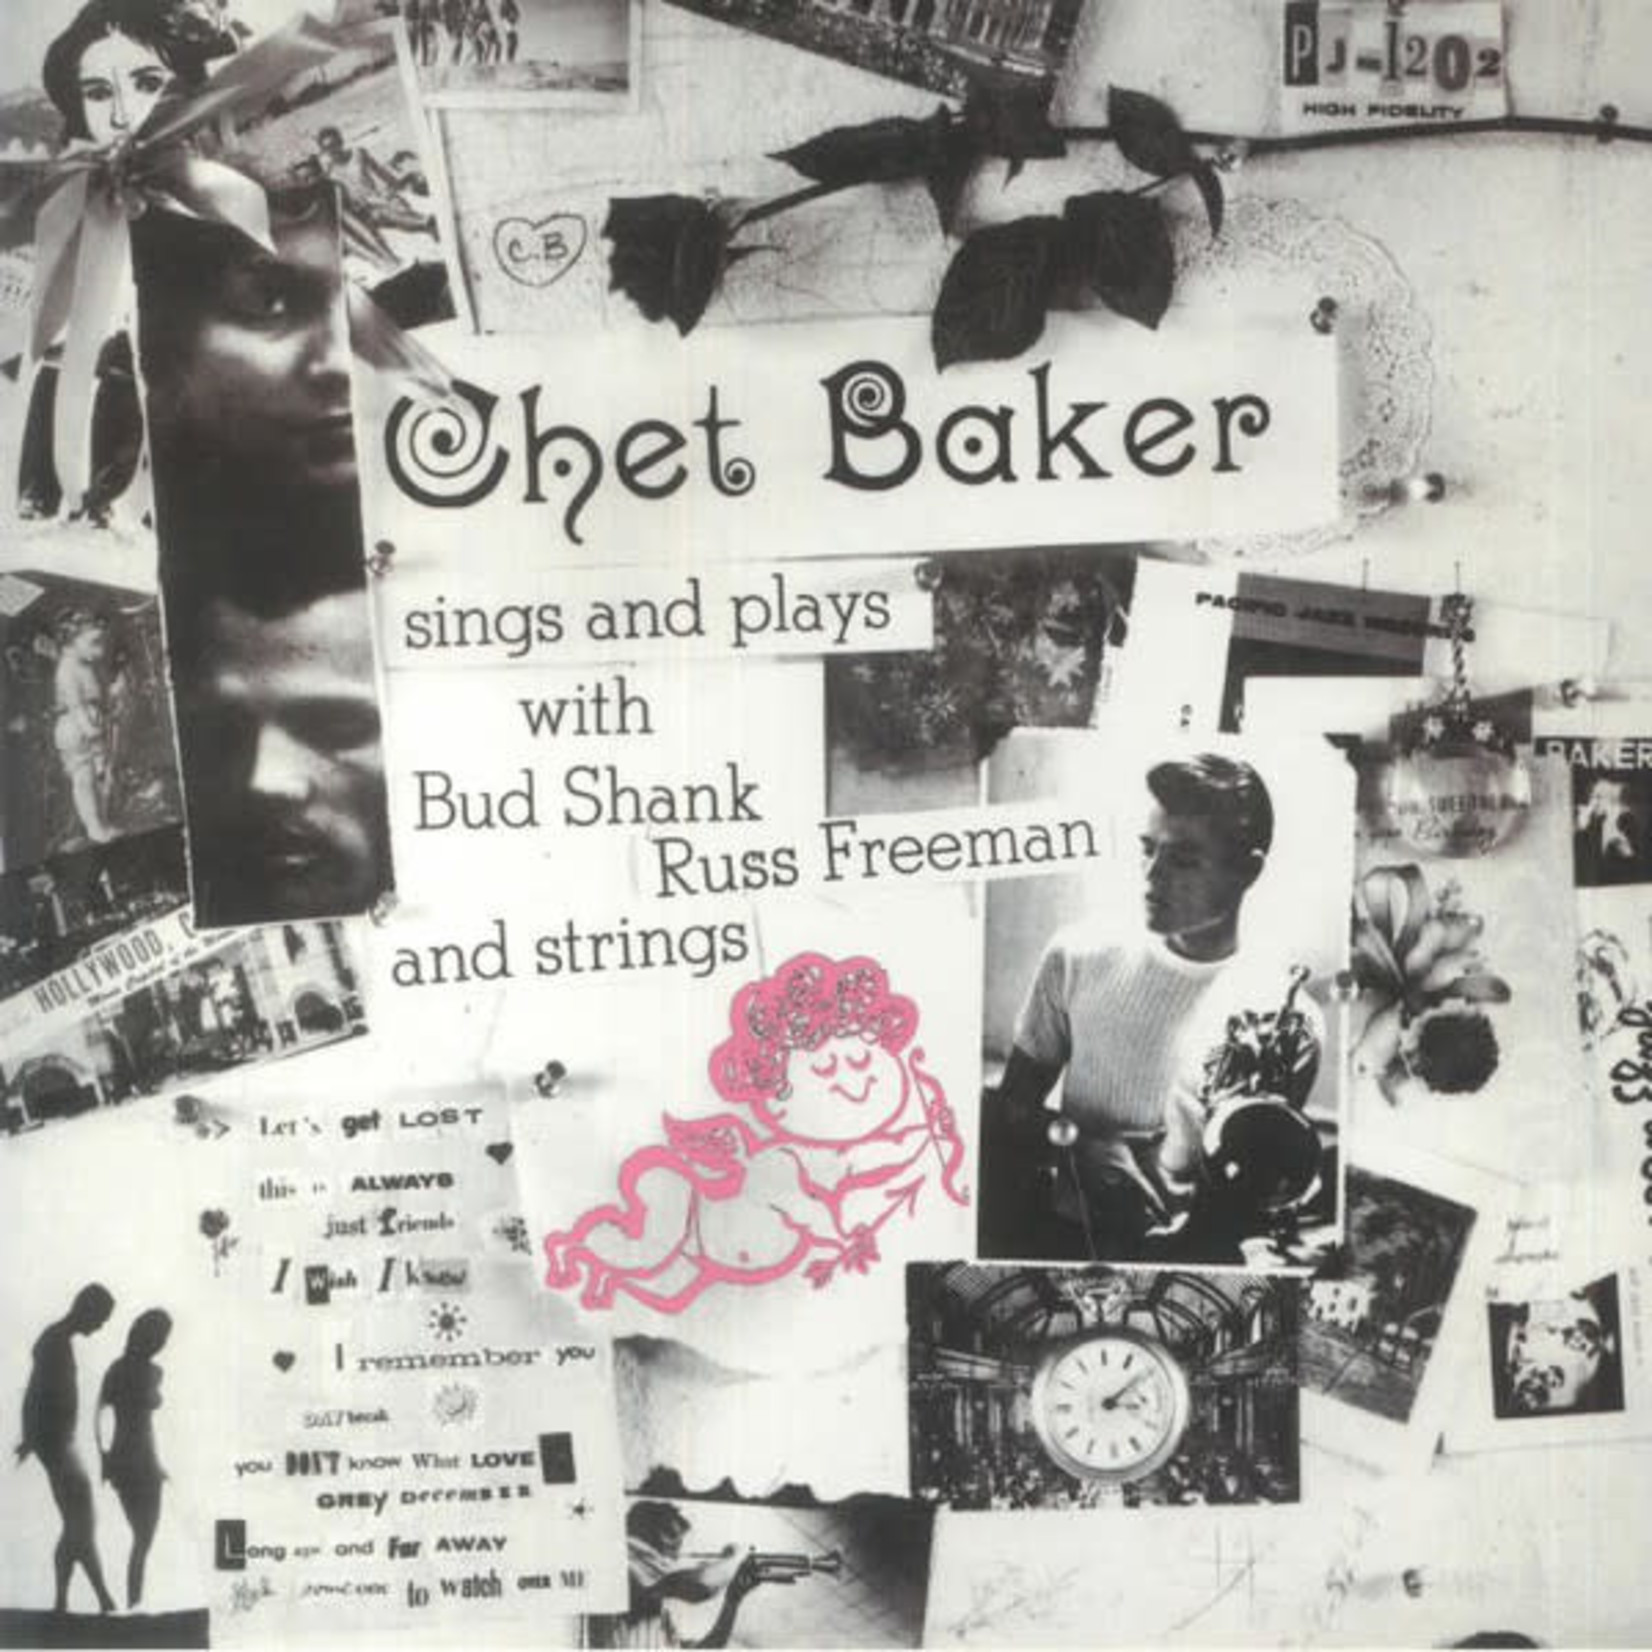 [New] Baker, Chet: Chet Baker Sings And Plays (Blue Note Tone Poet Series) [BLUE NOTE]